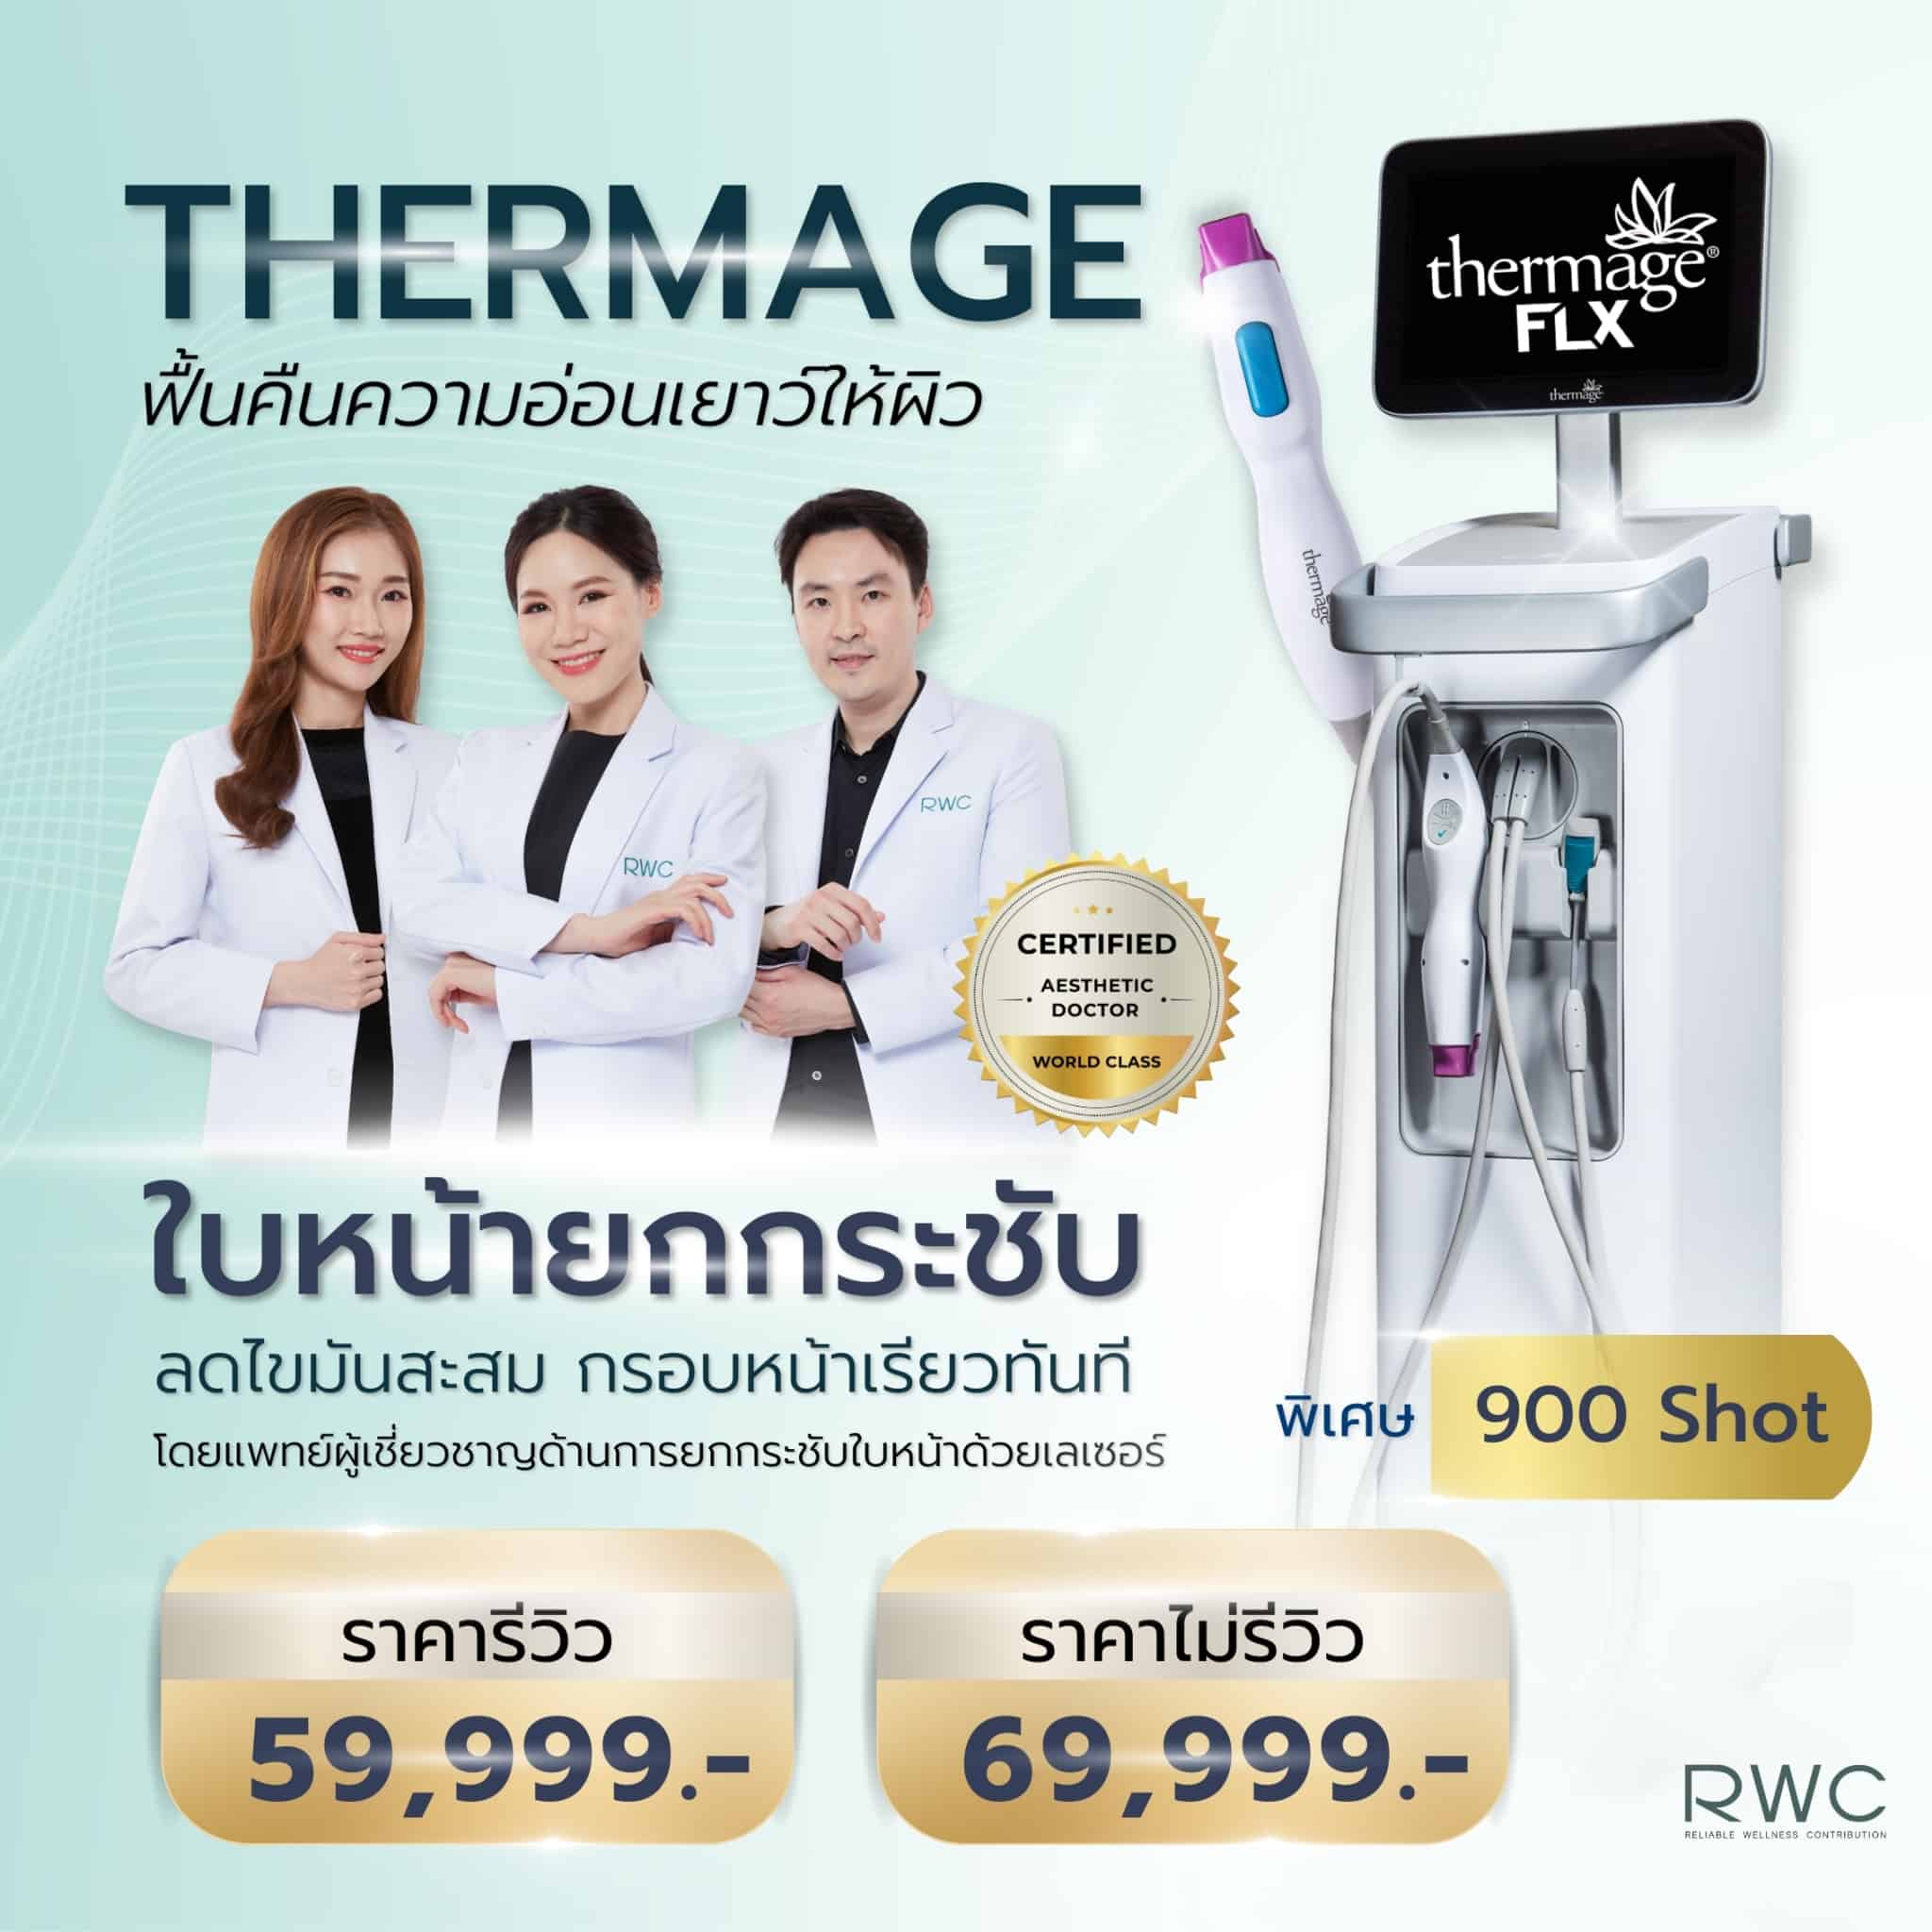 thermage price update